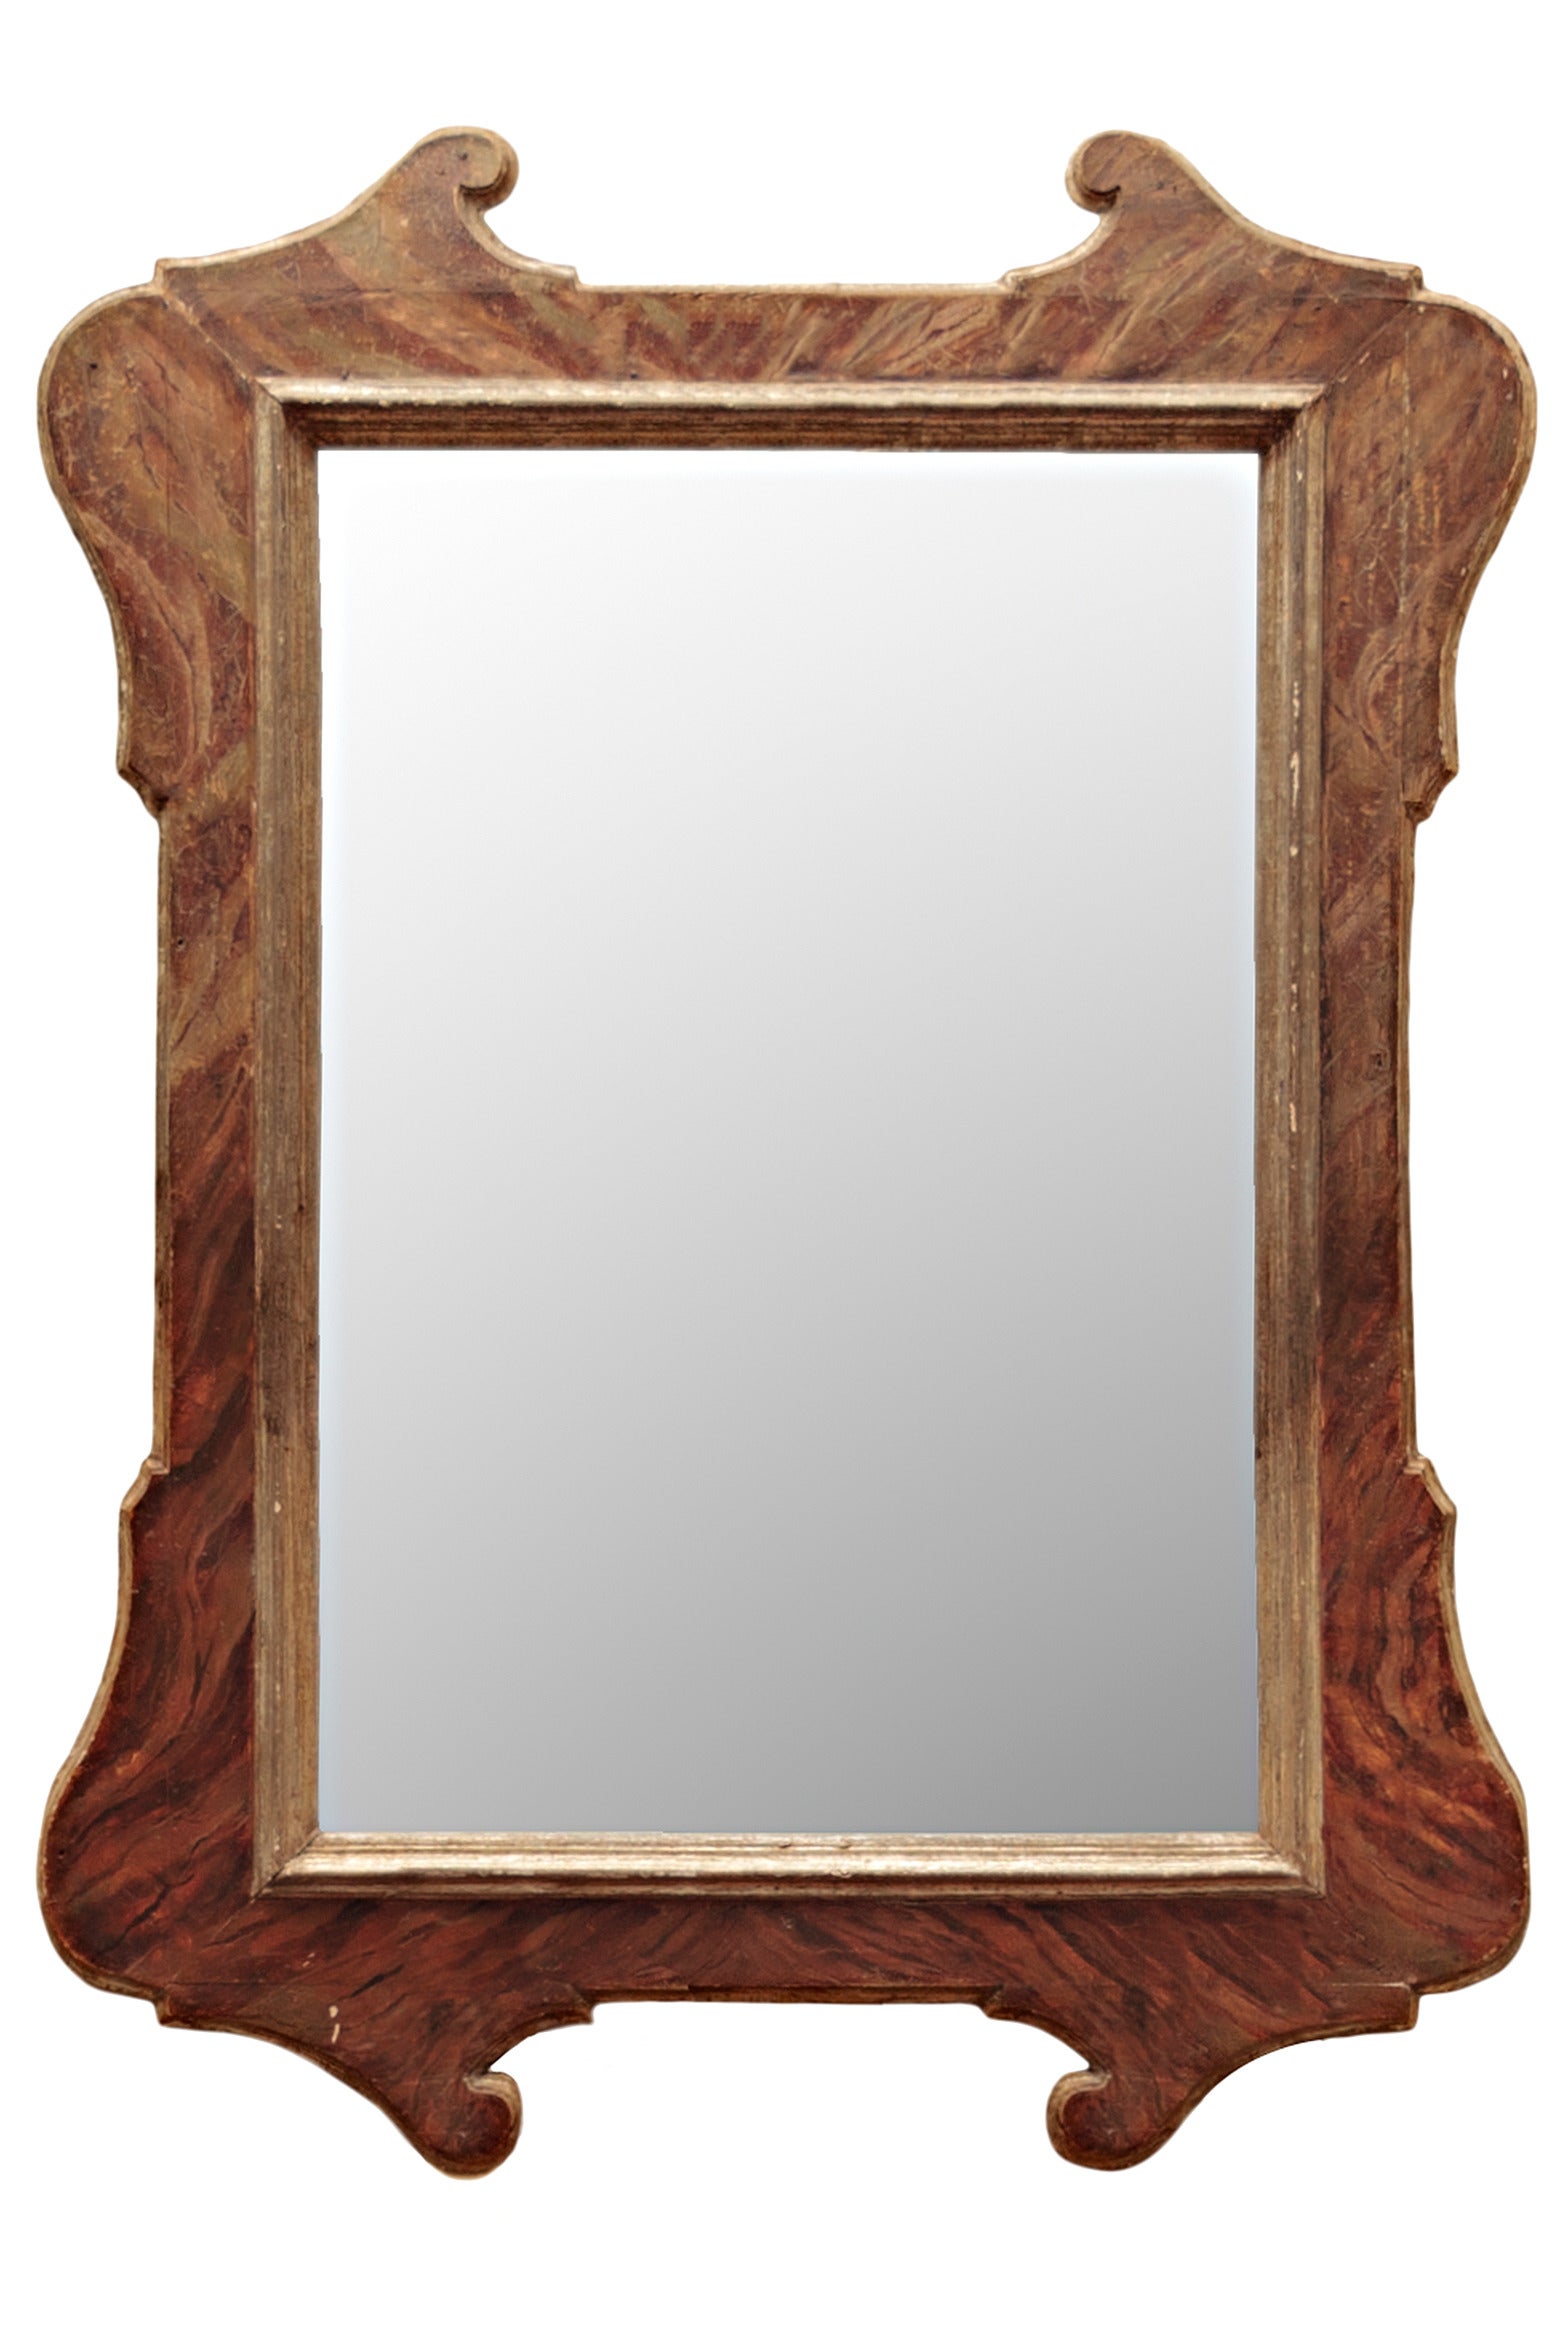 19th Century Italian Tuscan Mirror Faux Marble Painted Frame For Sale